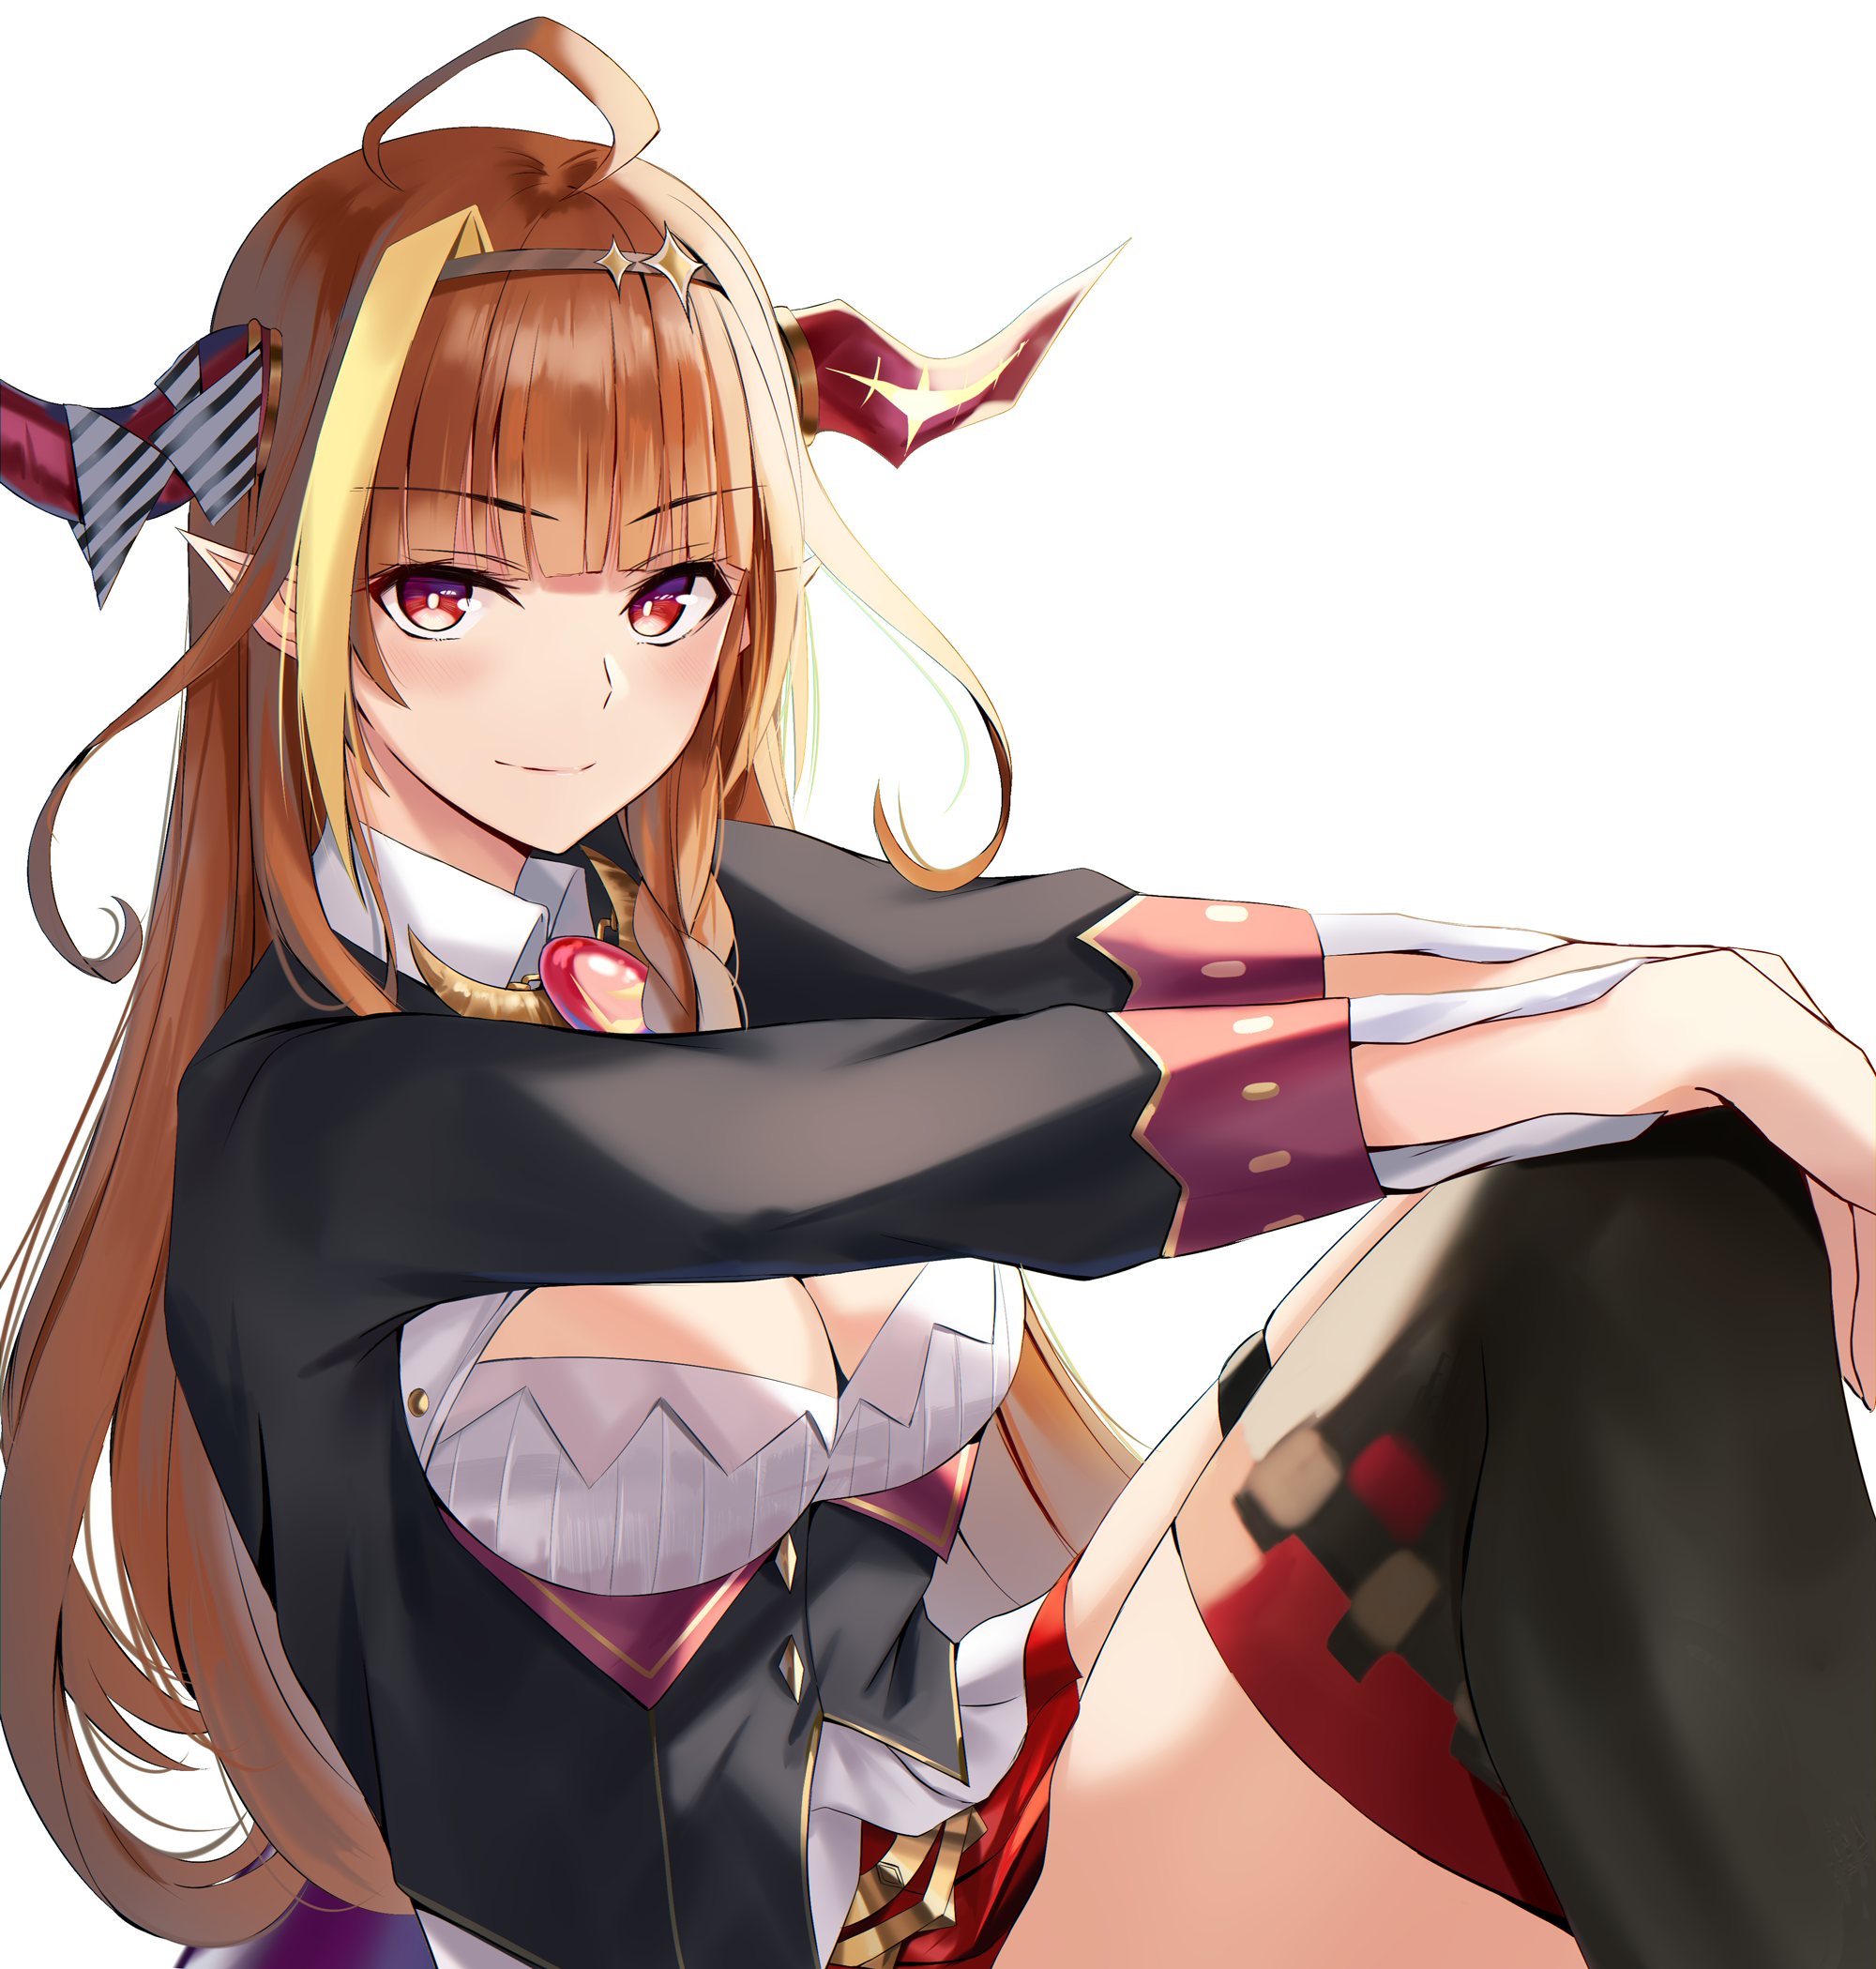 Anime 2000x2099 anime anime girls digital art artwork 2D portrait display Hololive Virtual Youtuber Nicky W long hair brunette horns pointy ears red eyes thigh-highs holding knees cleavage Kiryu Coco